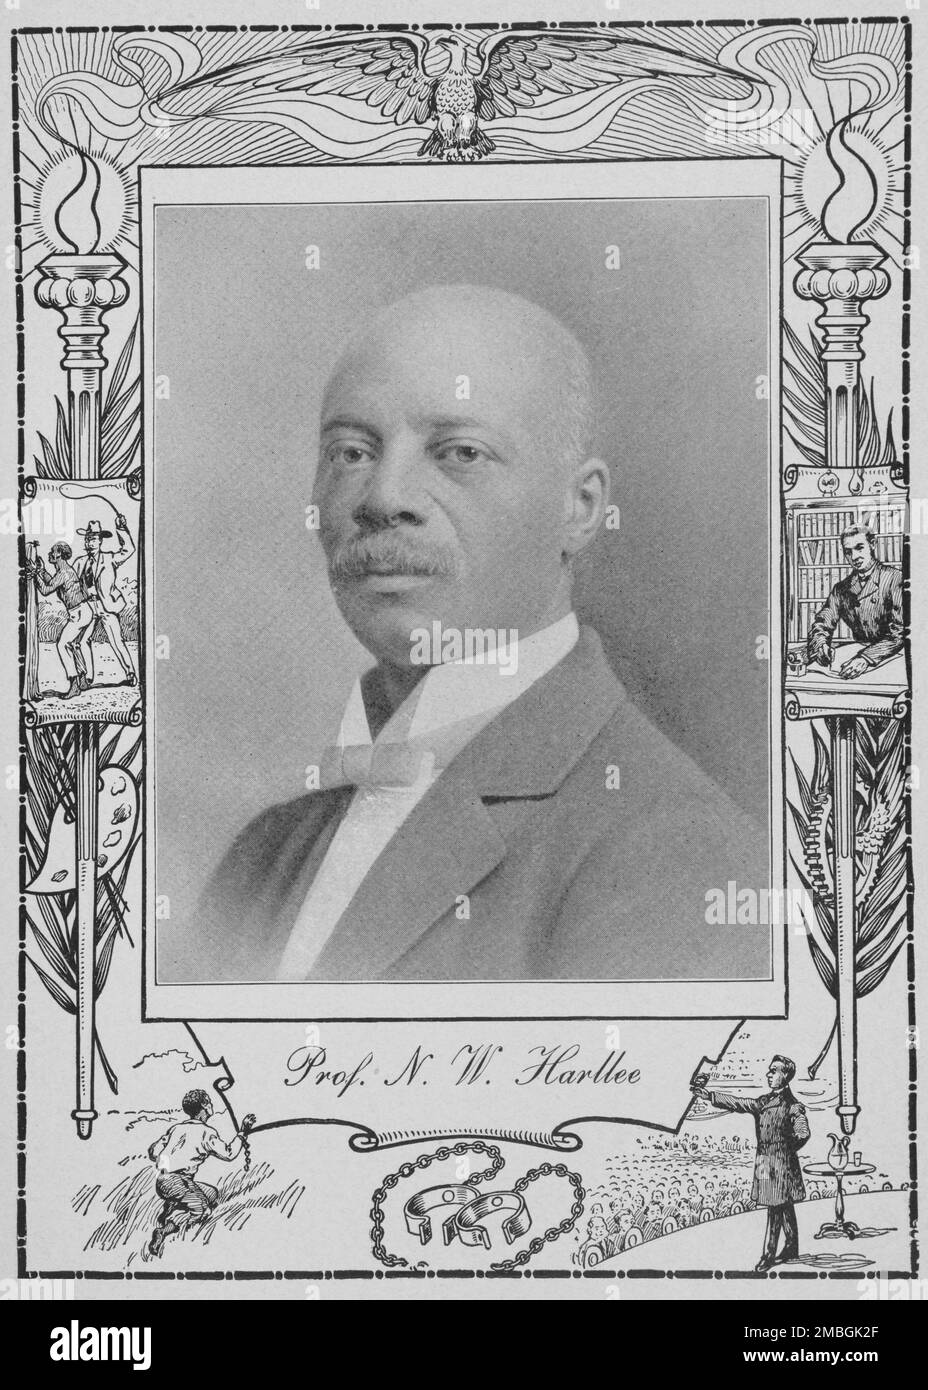 Prof. N. W. Harllee [recto], 1902. Norman Washington Harllee, writer, educator and advocate for African American education. Born enslaved, Harllee was the first superintendent of the Texas State Fair's Colored Department, principal of Dallas Colored High School. From a 'cyclopedia of thought on the vital topics relating to' black Americans. Stock Photo